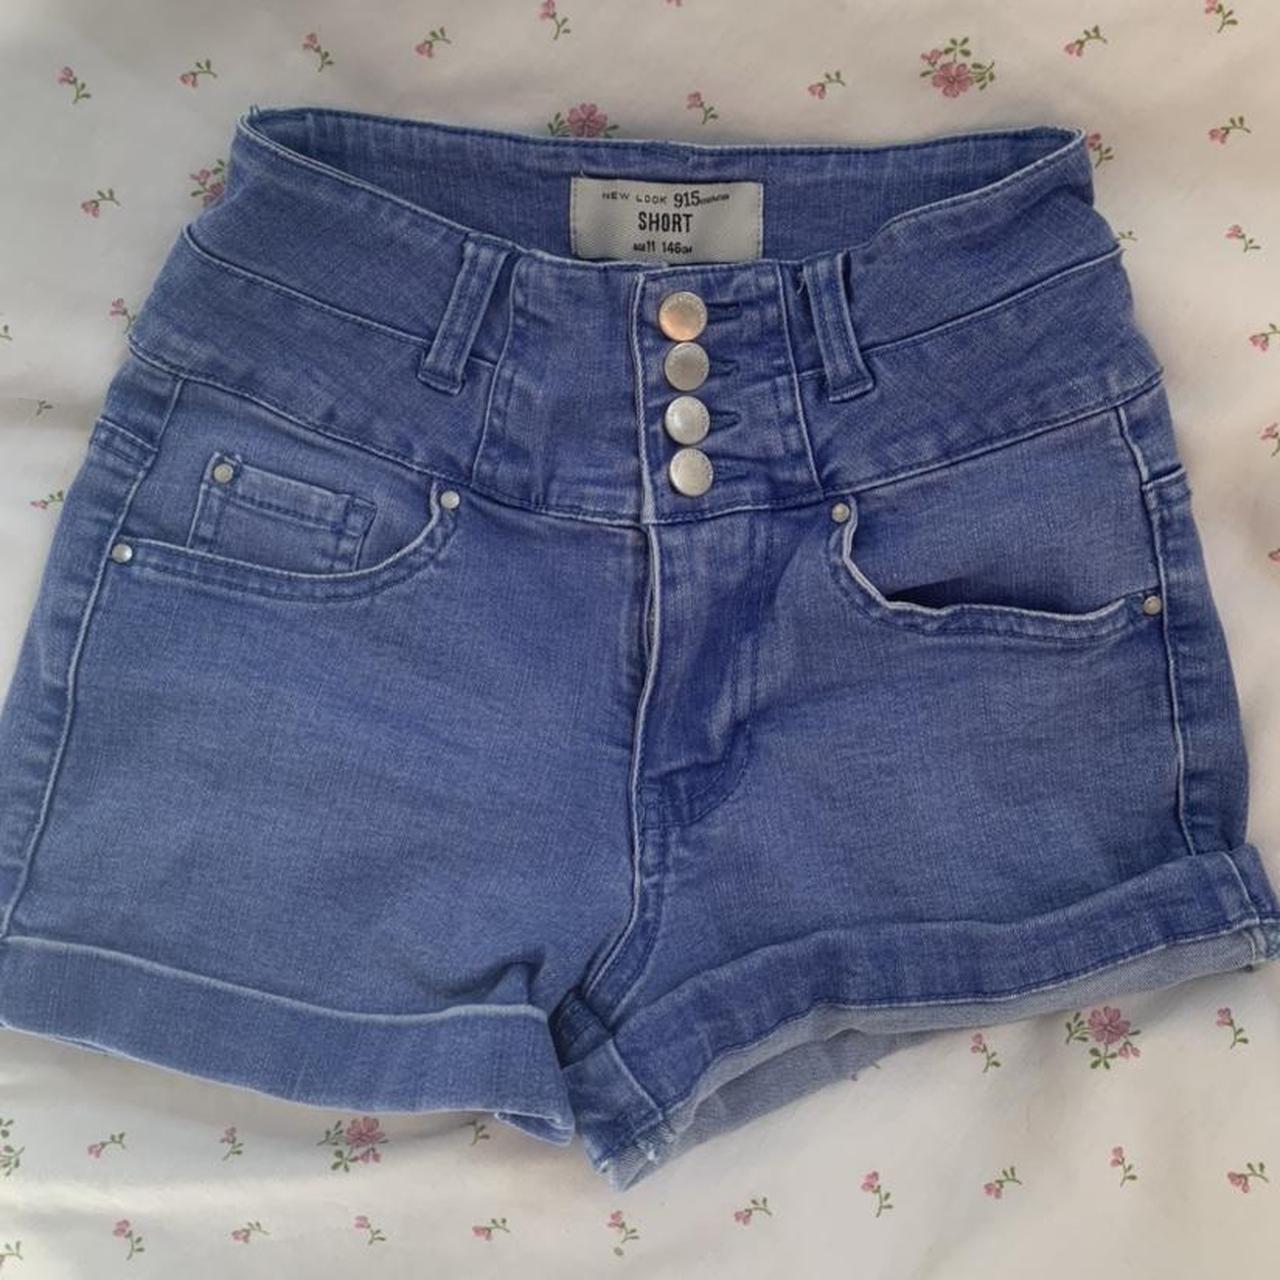 New look 915 blue denim shorts Age 11 might fit a 4.... - Depop